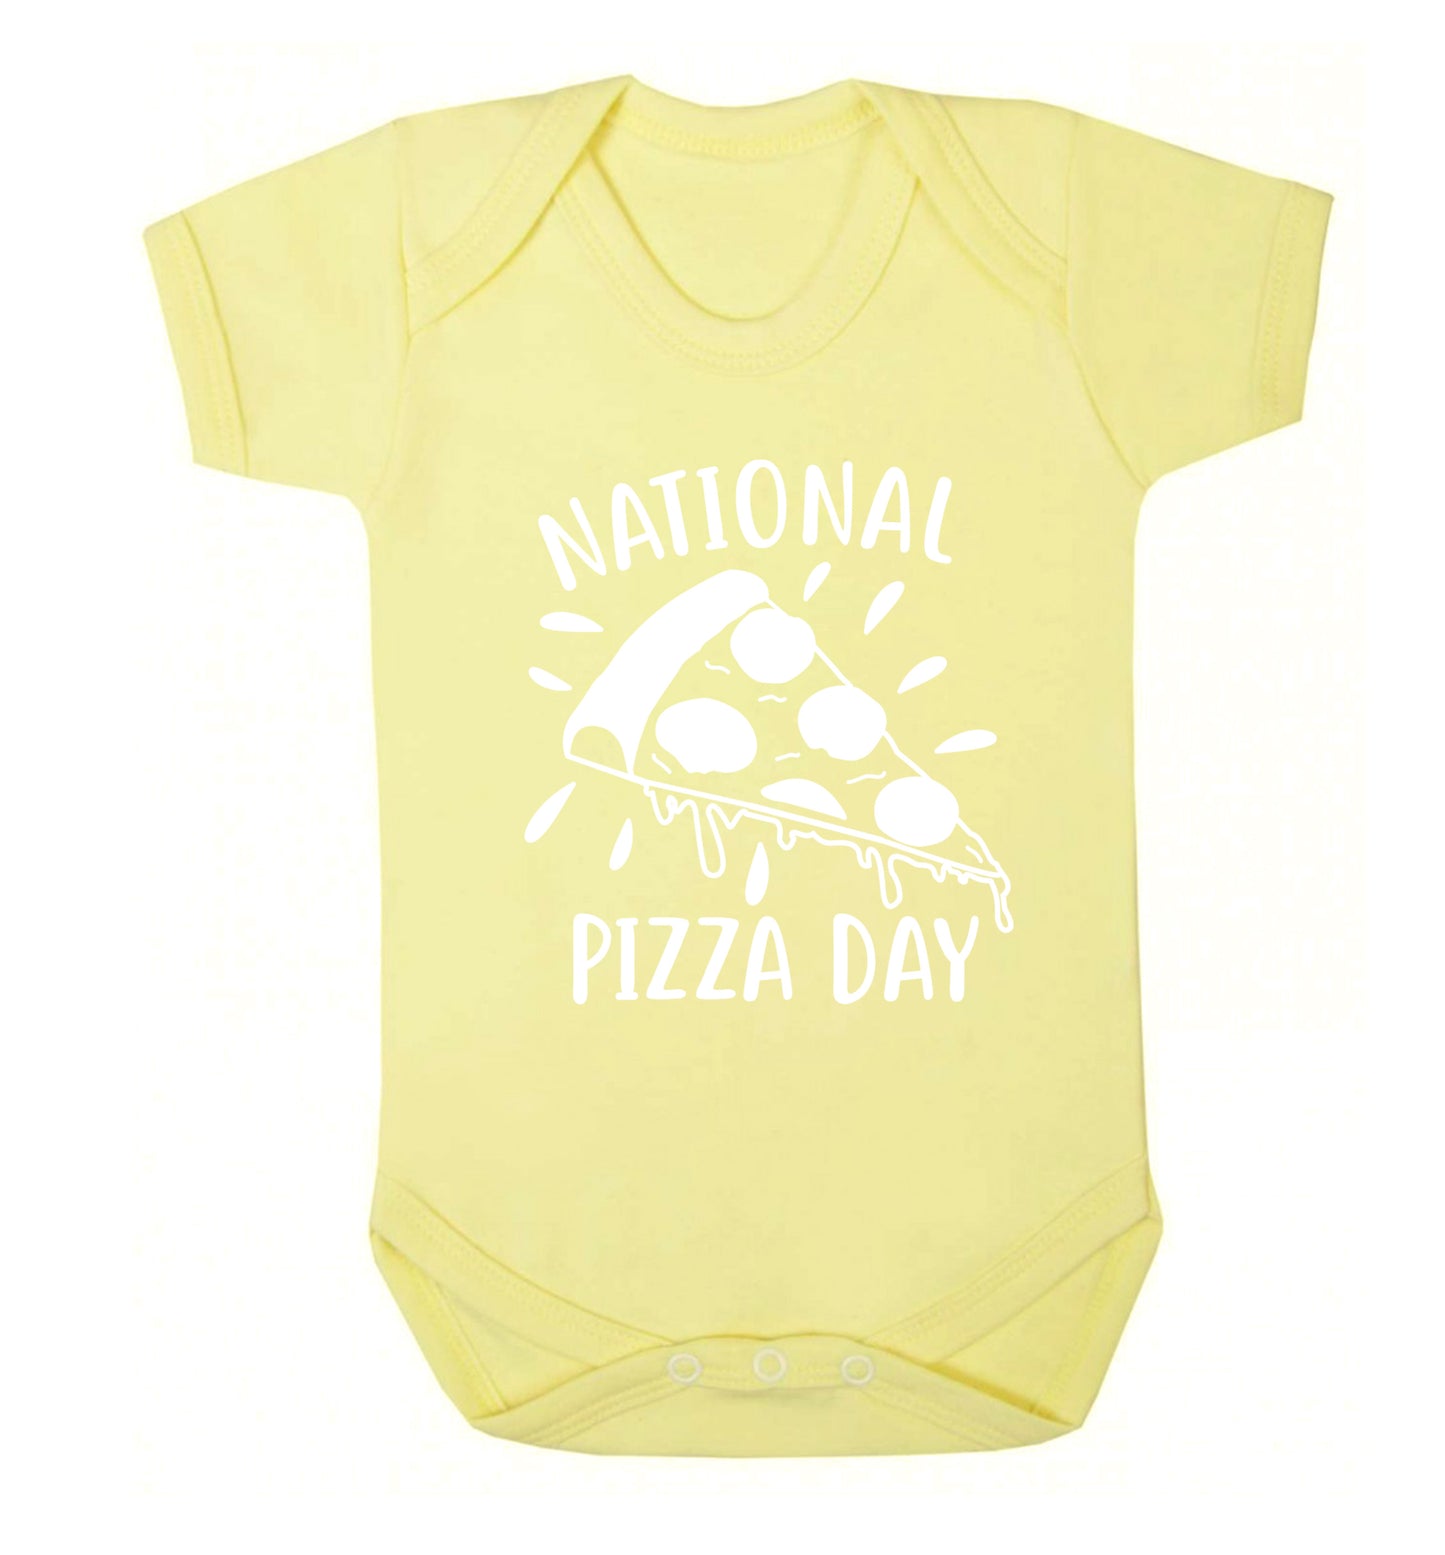 National pizza day Baby Vest pale yellow 18-24 months